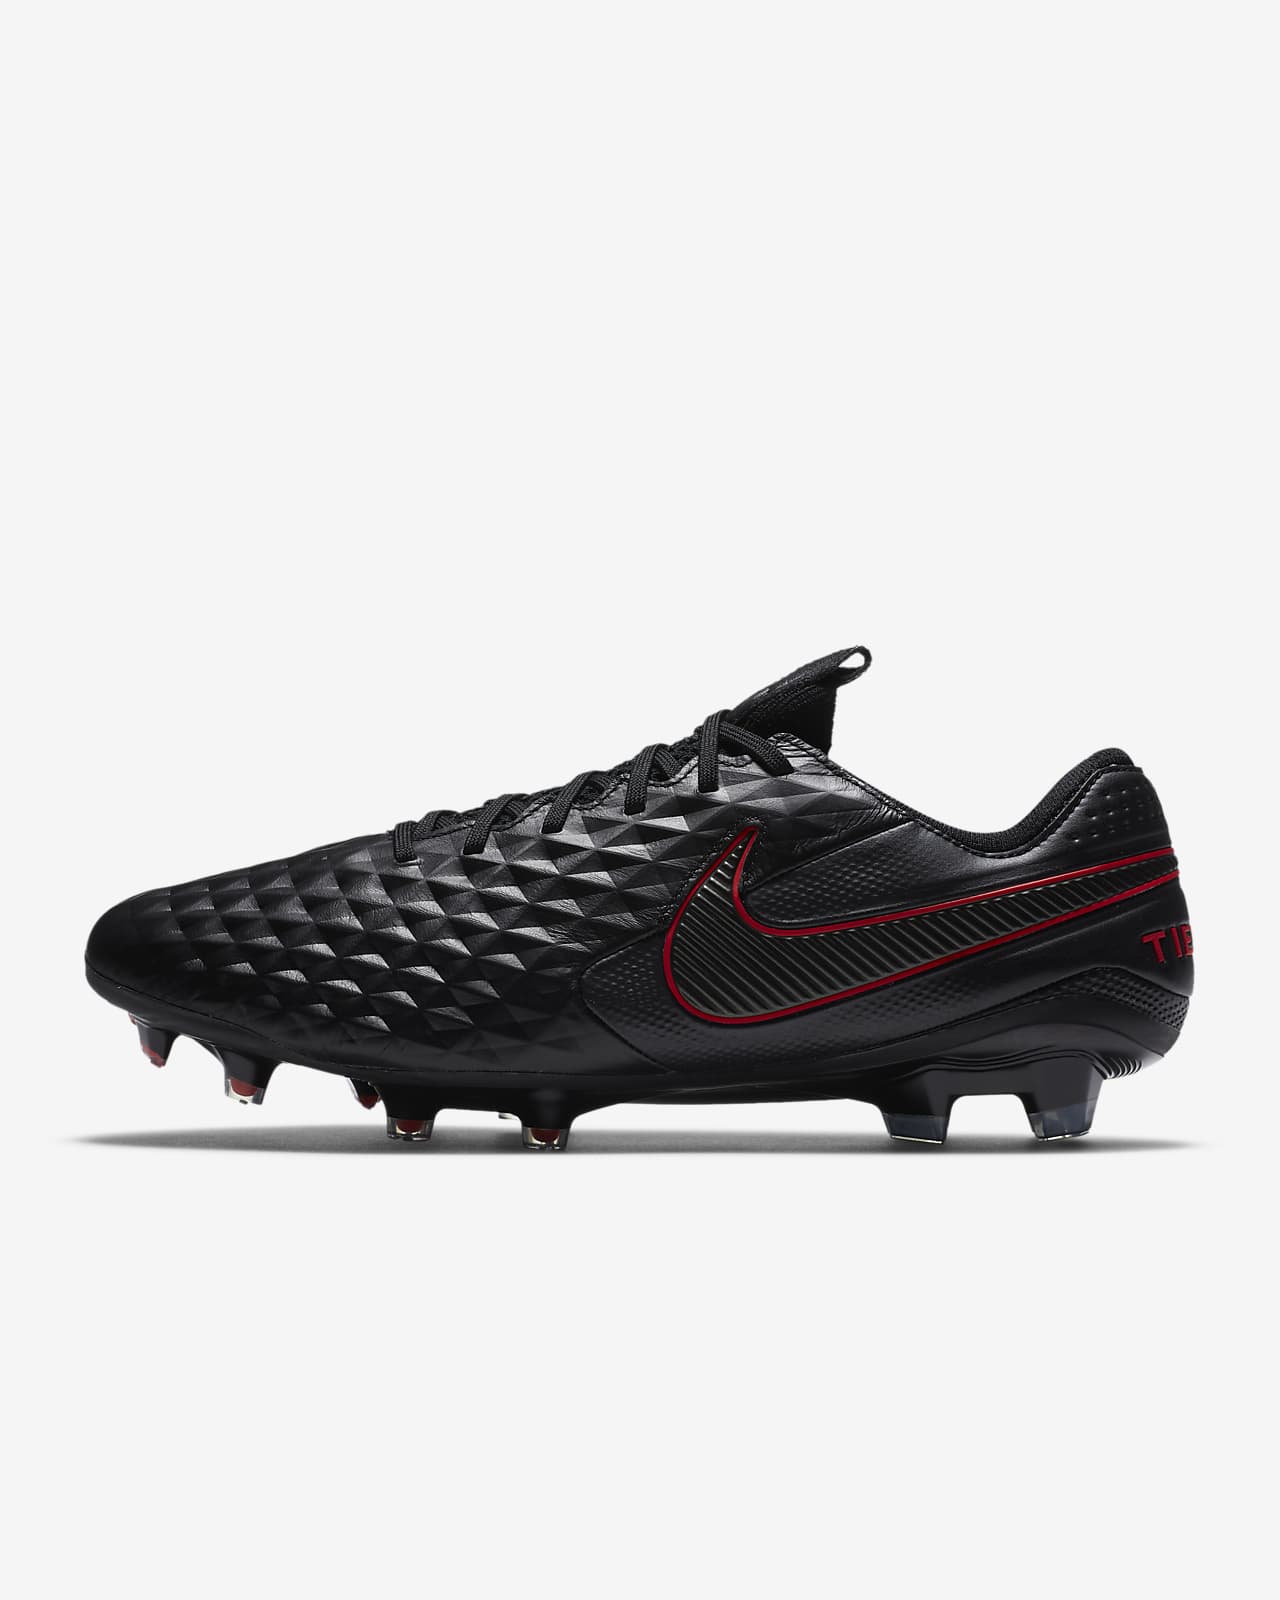 soccer boots nike price